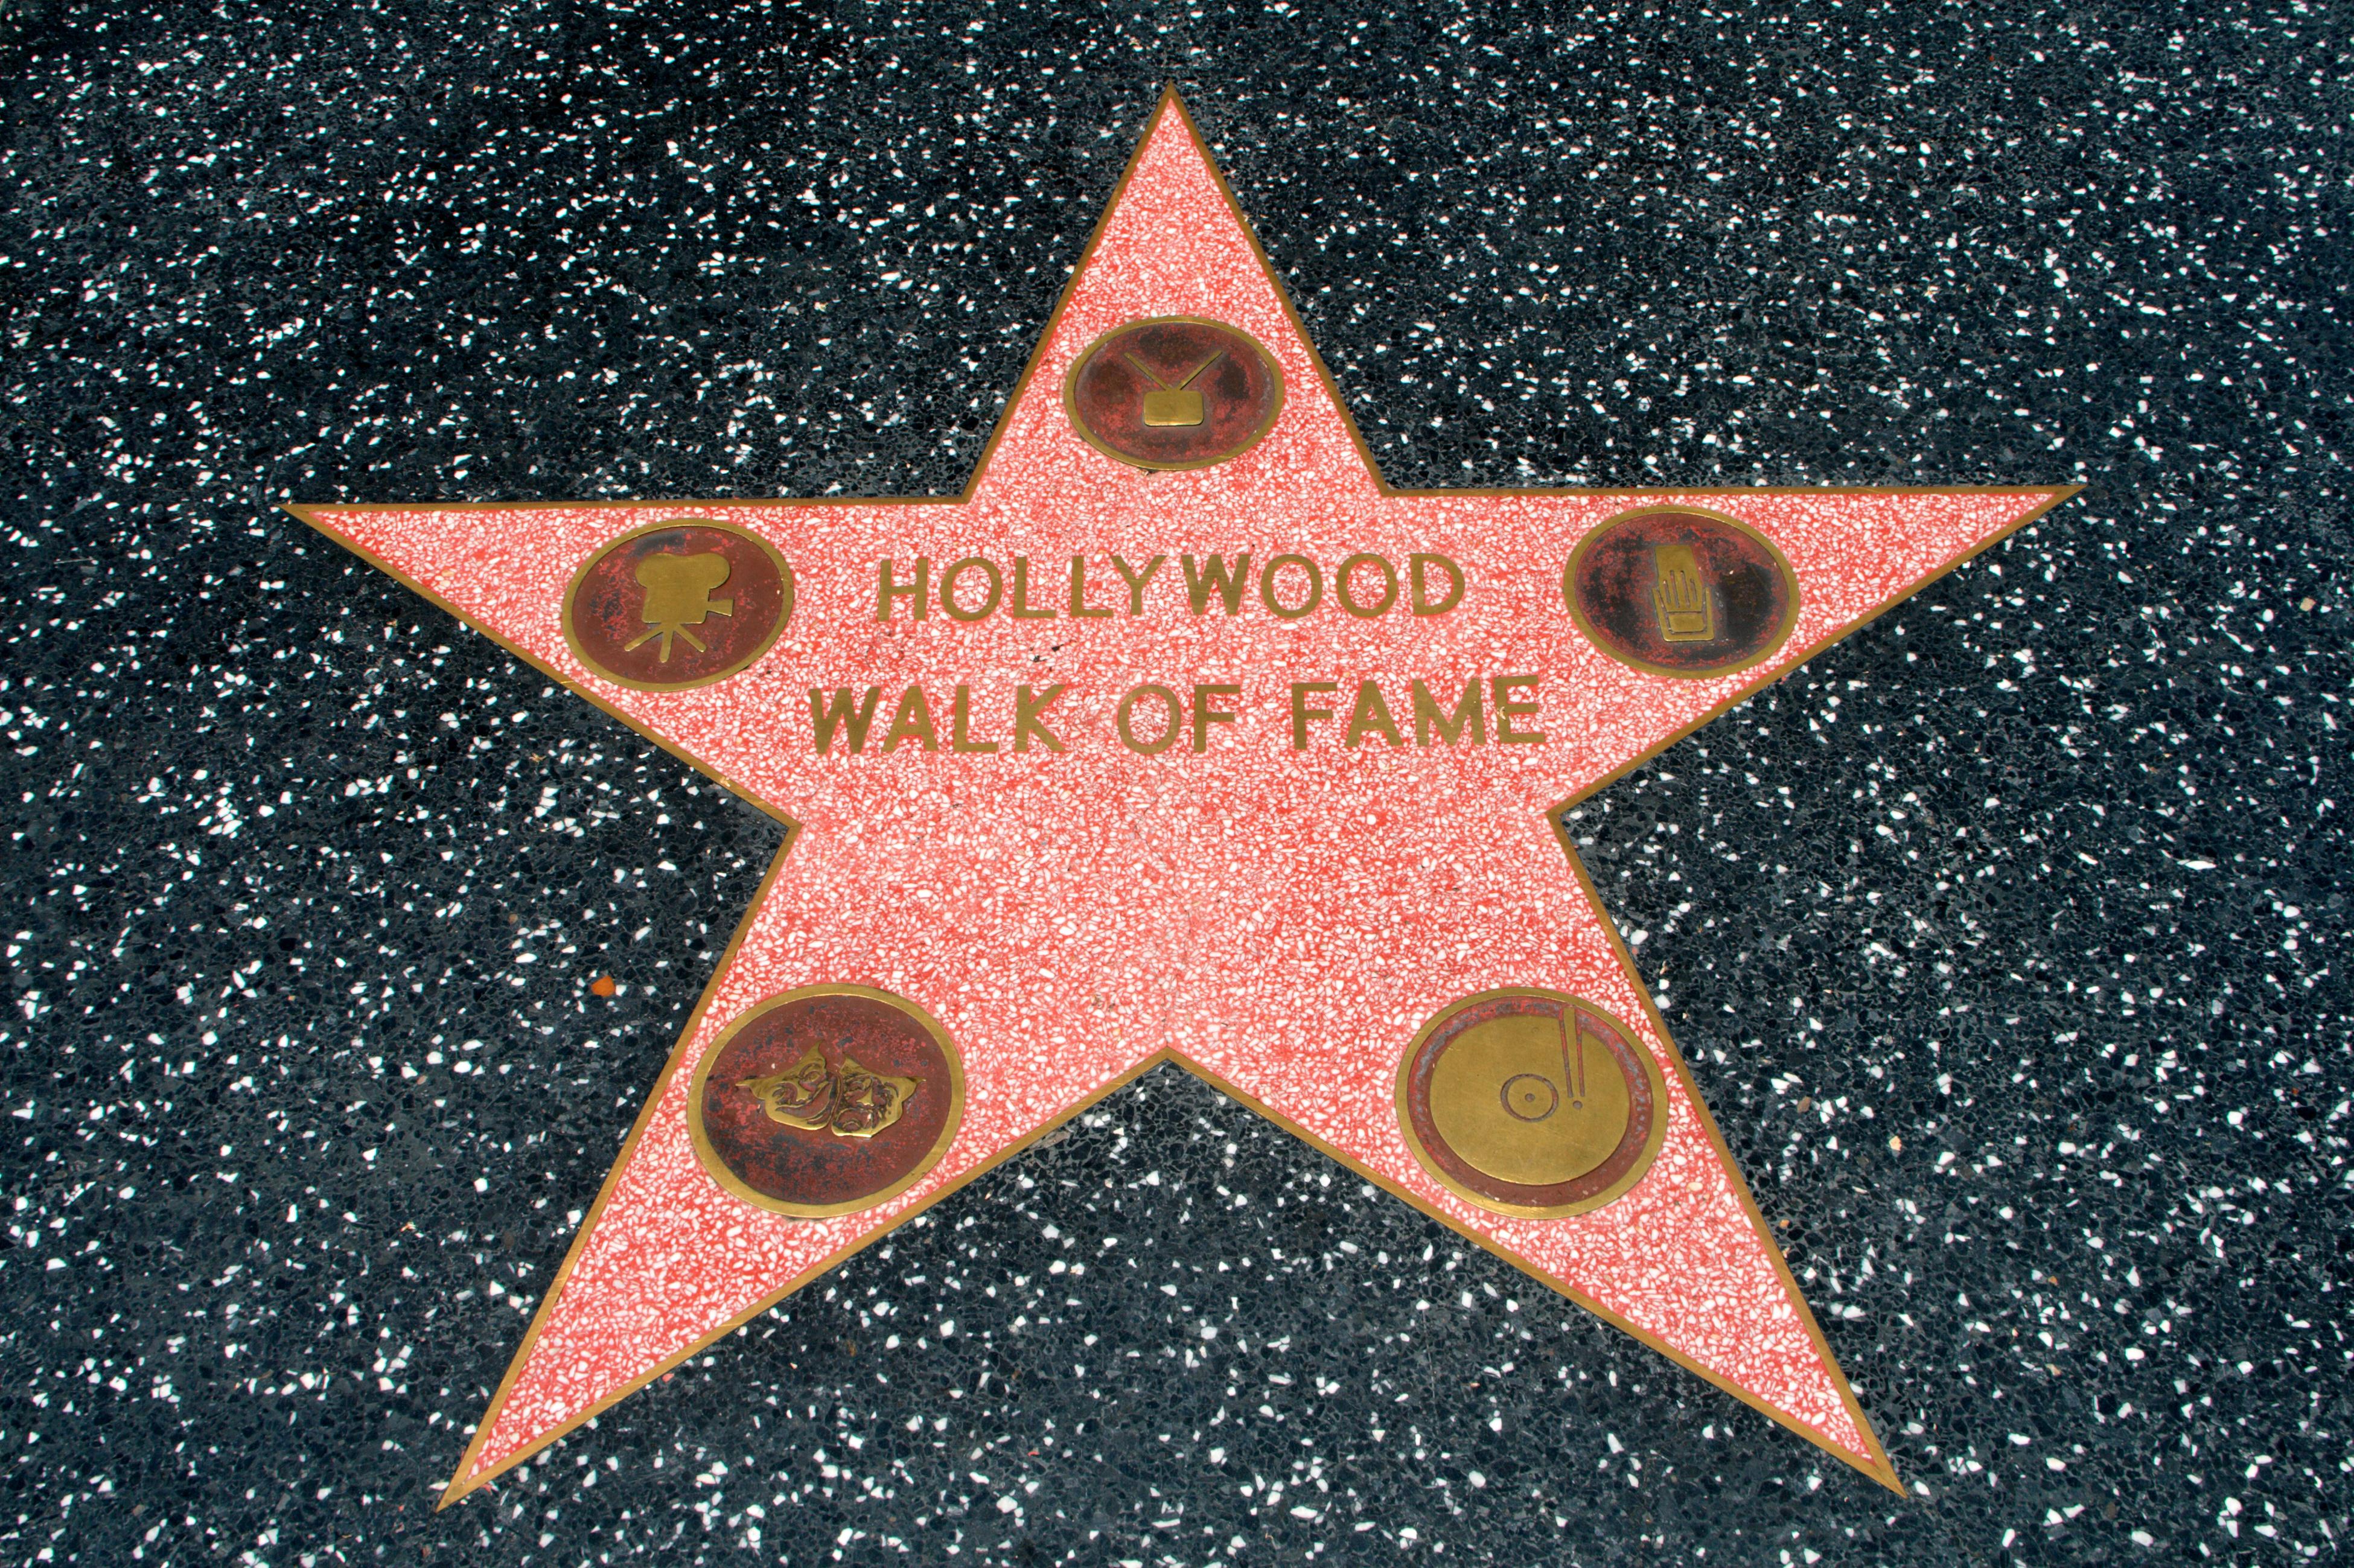 Hollywood Wallpaper High Quality